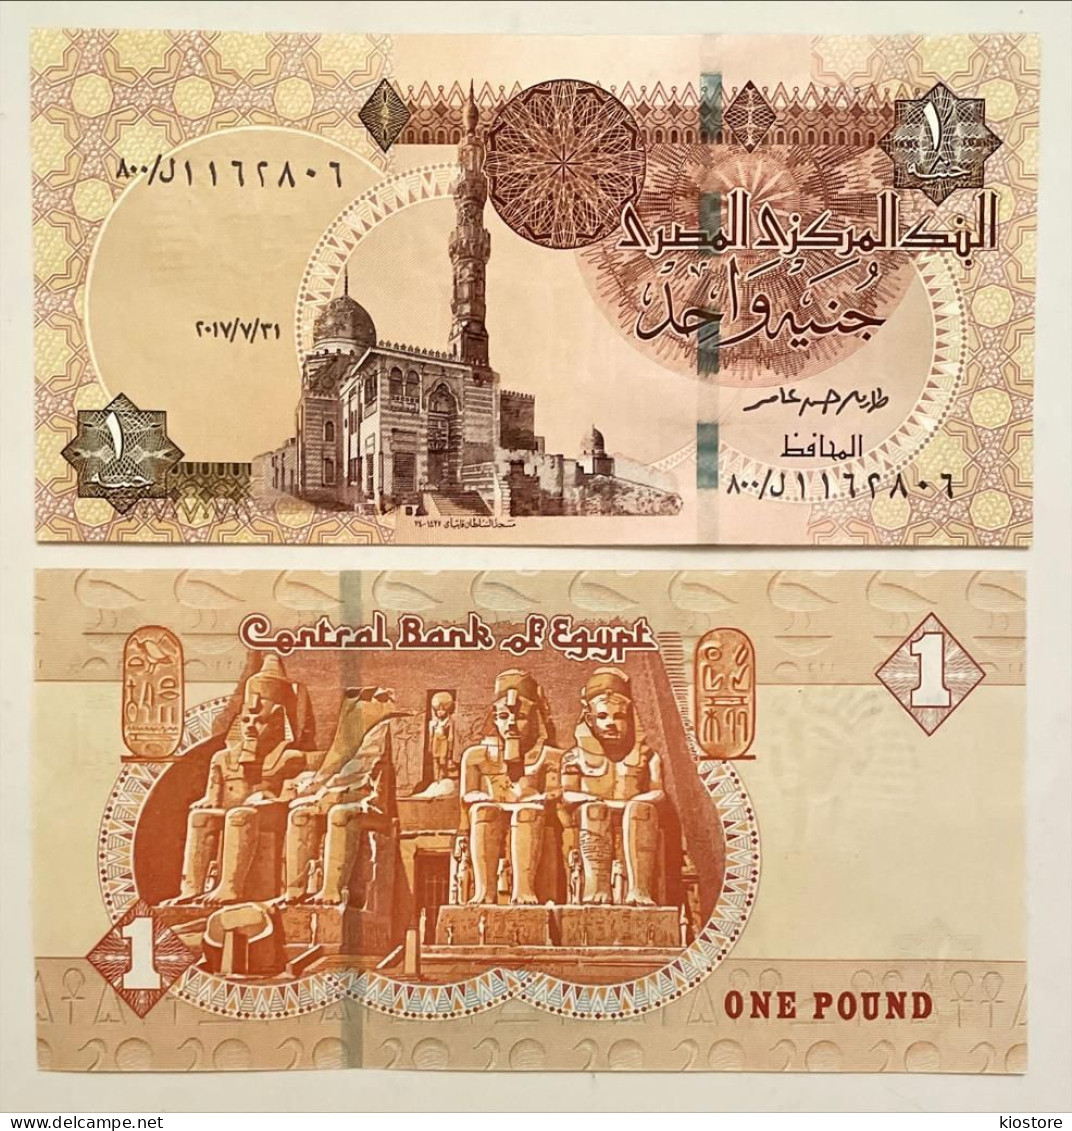 Egypt 1 Pound 2017 Serial 800 Replacement UNC - Egypte